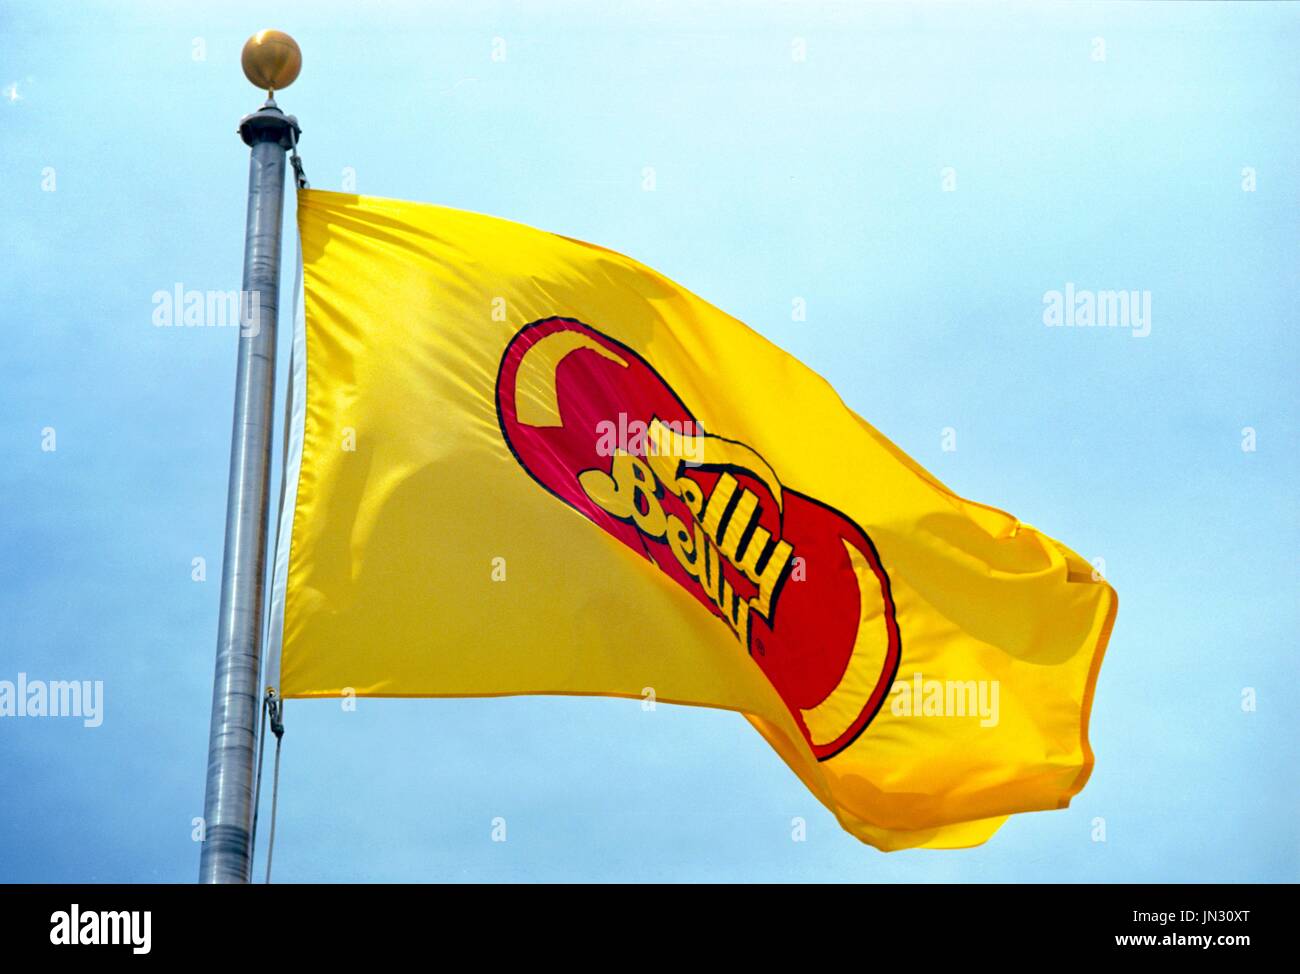 A yellow flag with the Jelly Belly Candy Company logo flies at the Jelly Belly Candy Company factory in Fairfield, California, June 7, 2017. Stock Photo